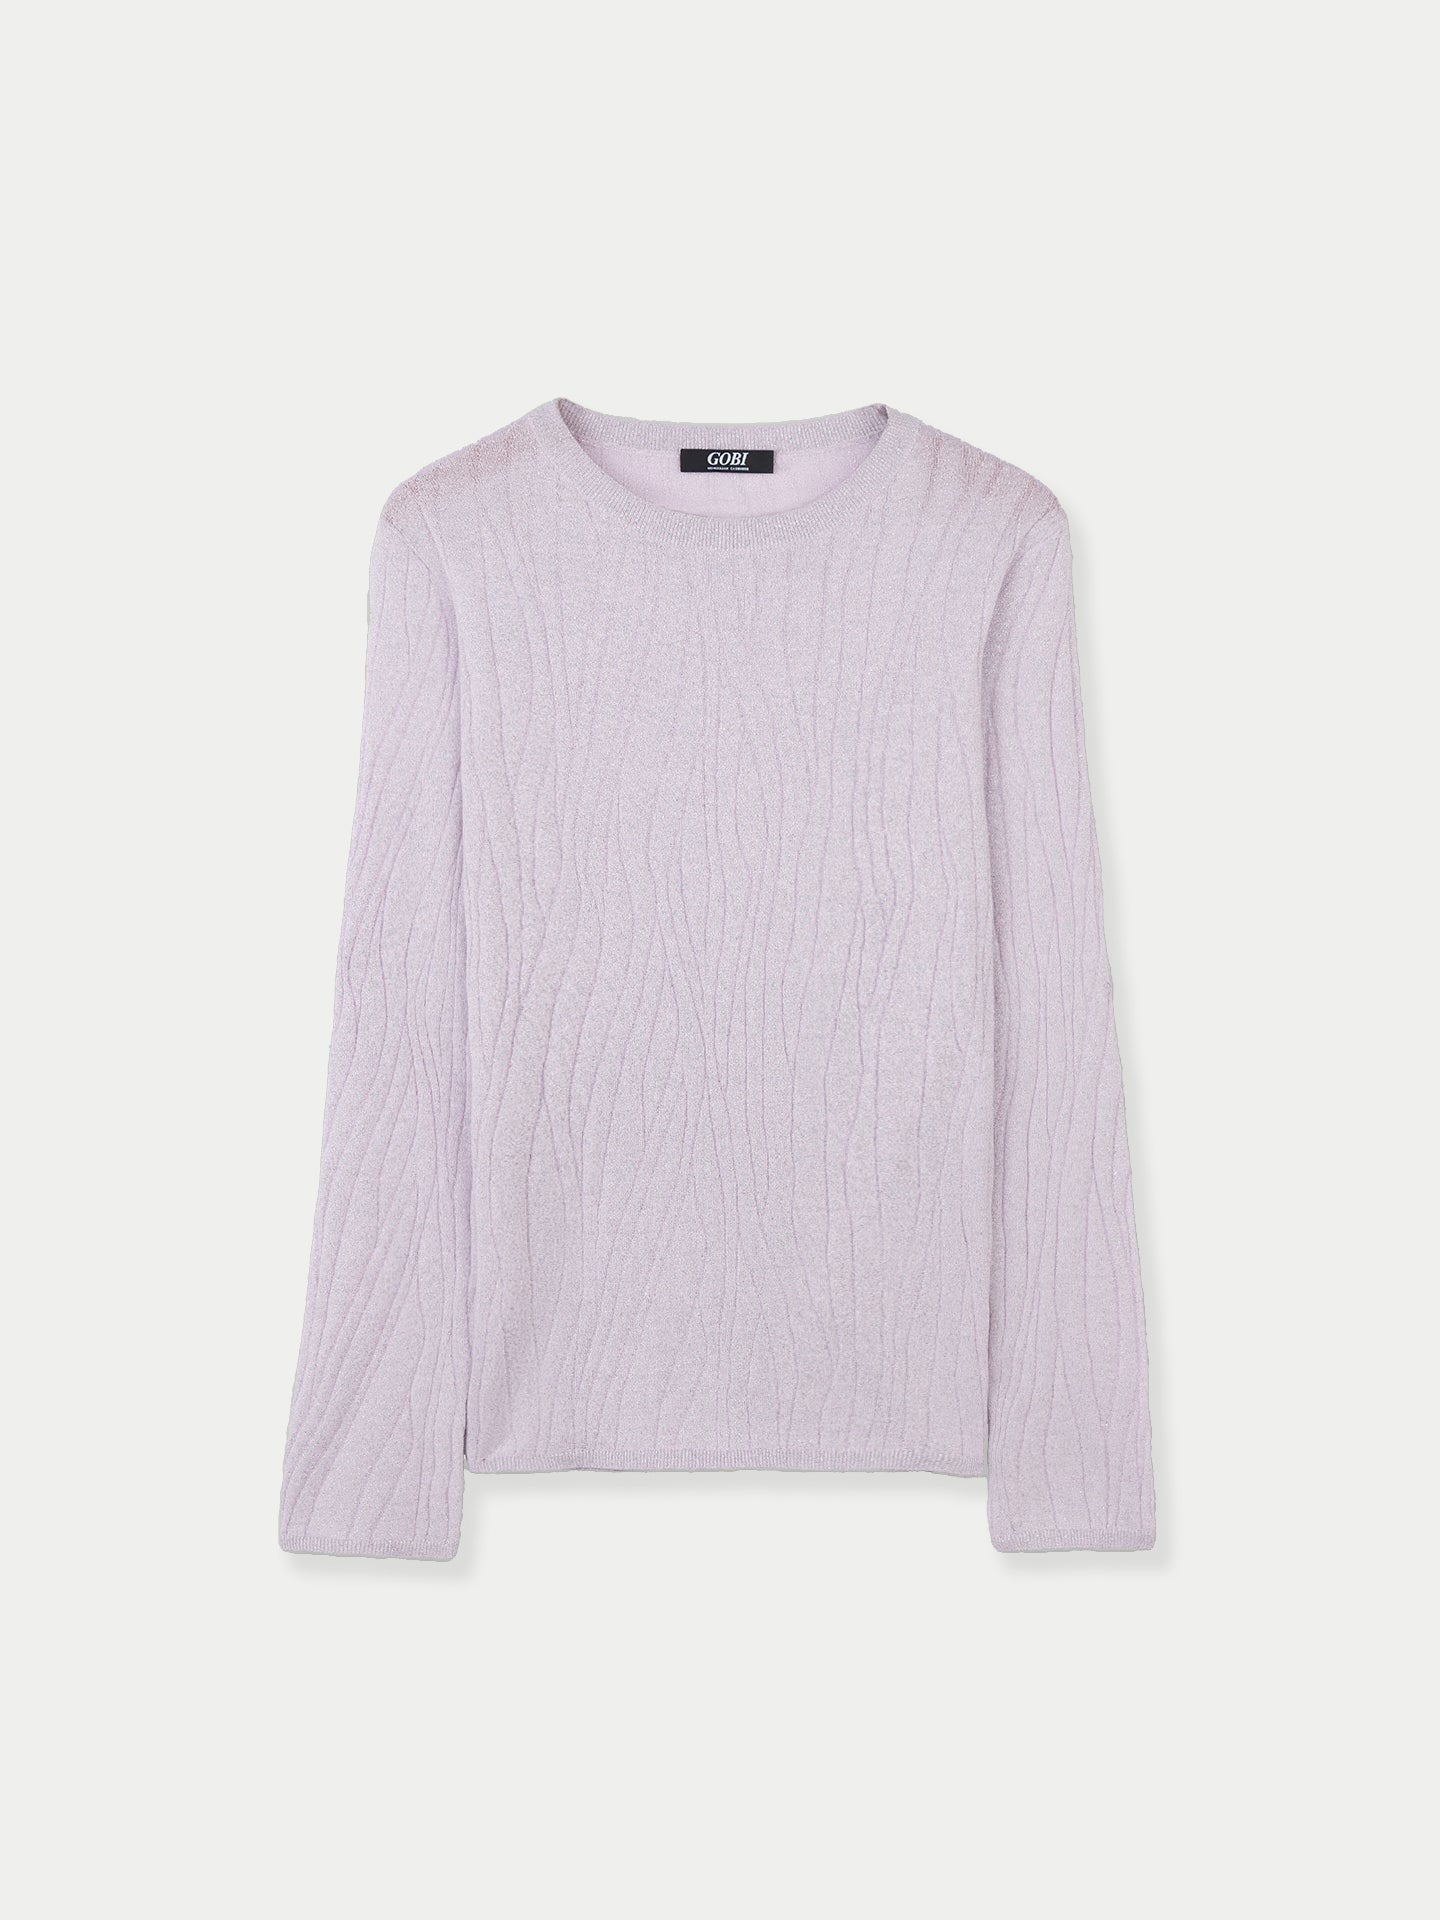 Women's Cashmere Silk Sweater with Silver Threading Orchid Tint - Gobi Cashmere